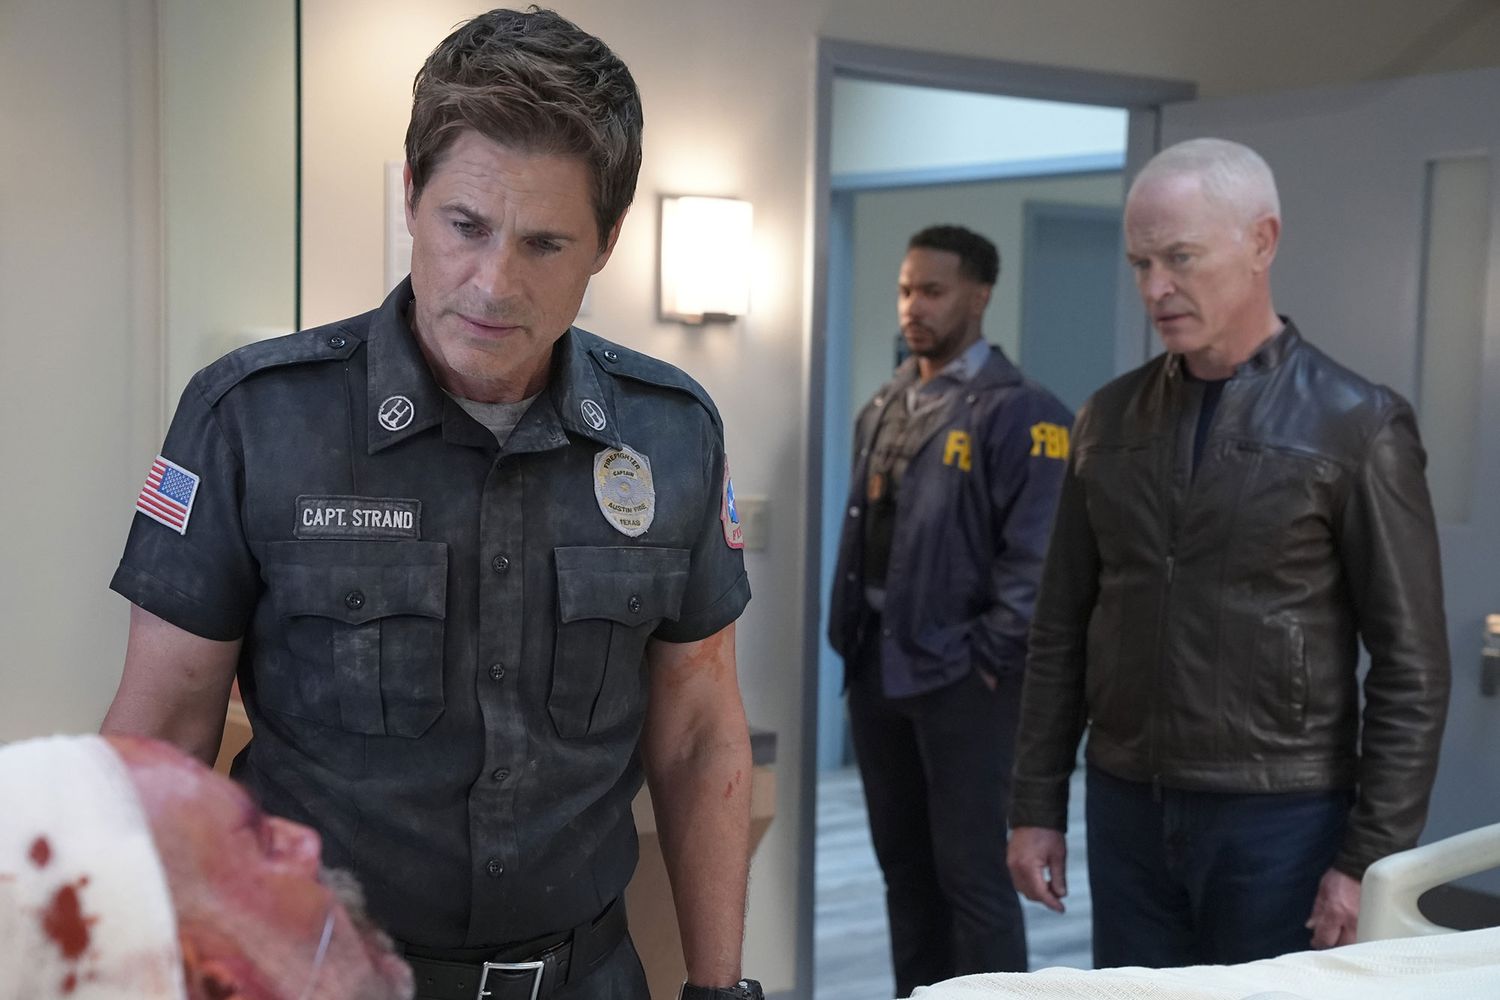 Preview explosive new ‘9-1-1: Lone Star’ episode: ‘Things will all go to hell’